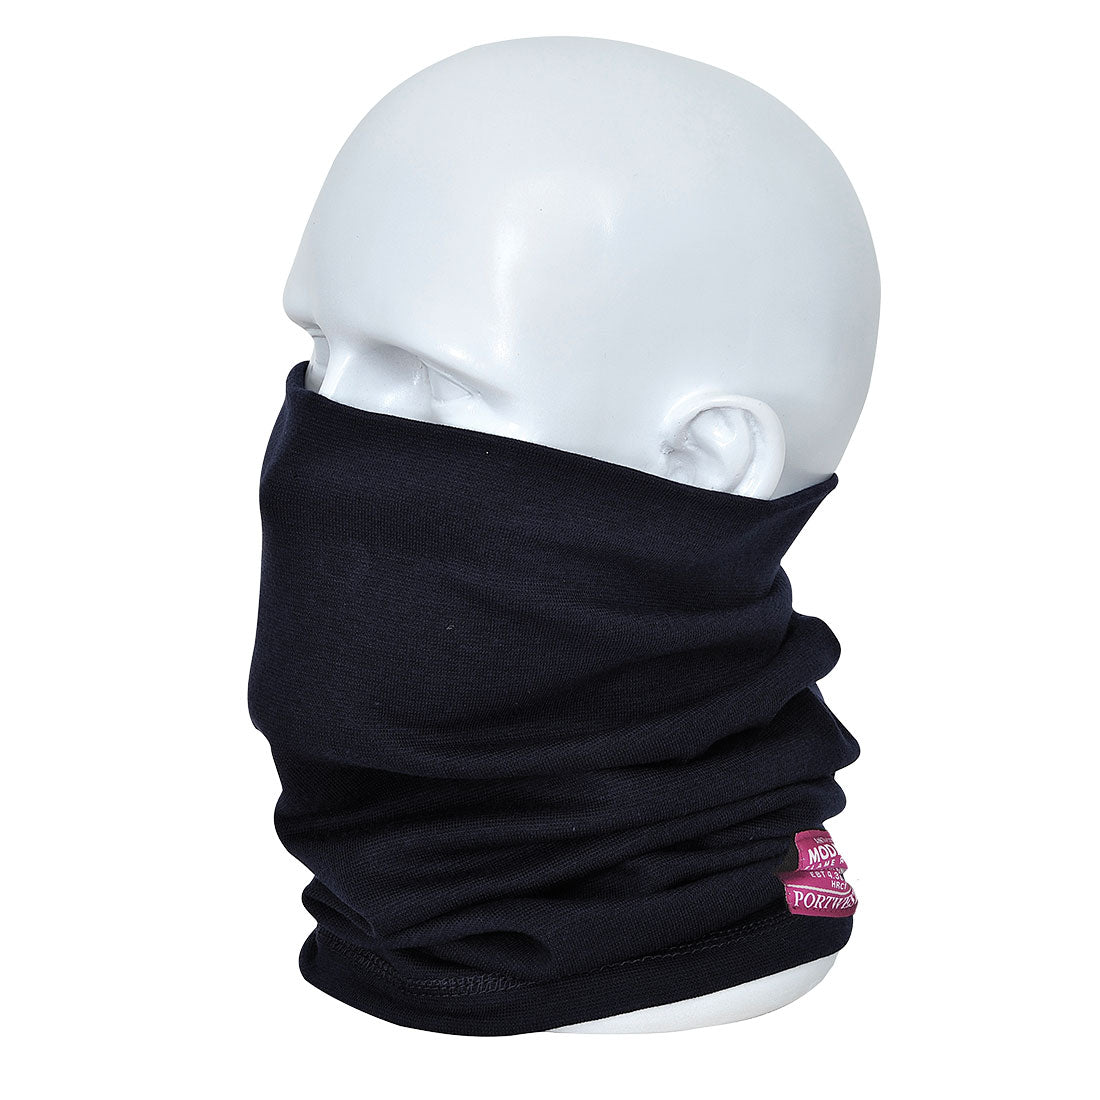 Flame resistant and antistatic neck cover